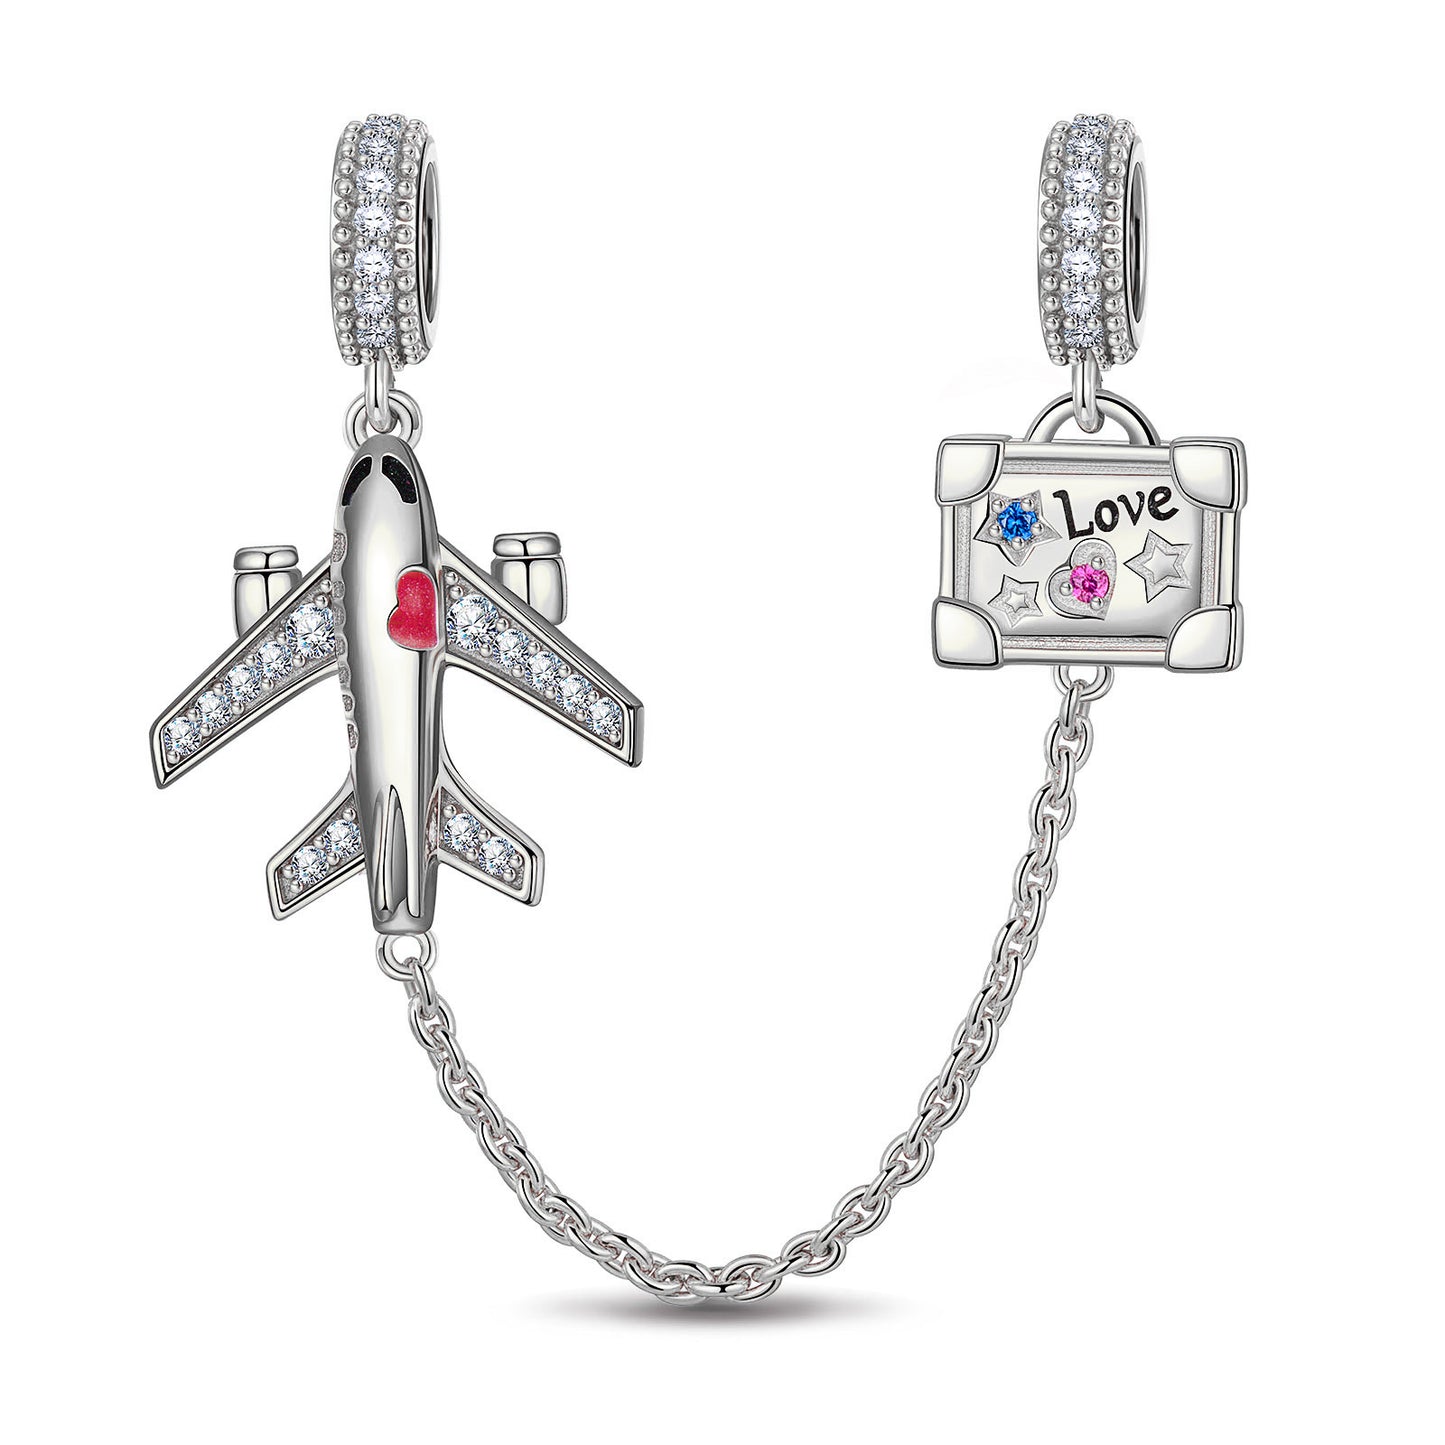 Journey to Love Tarnish-resistant Silver Charms With Enamel In White Gold Plated